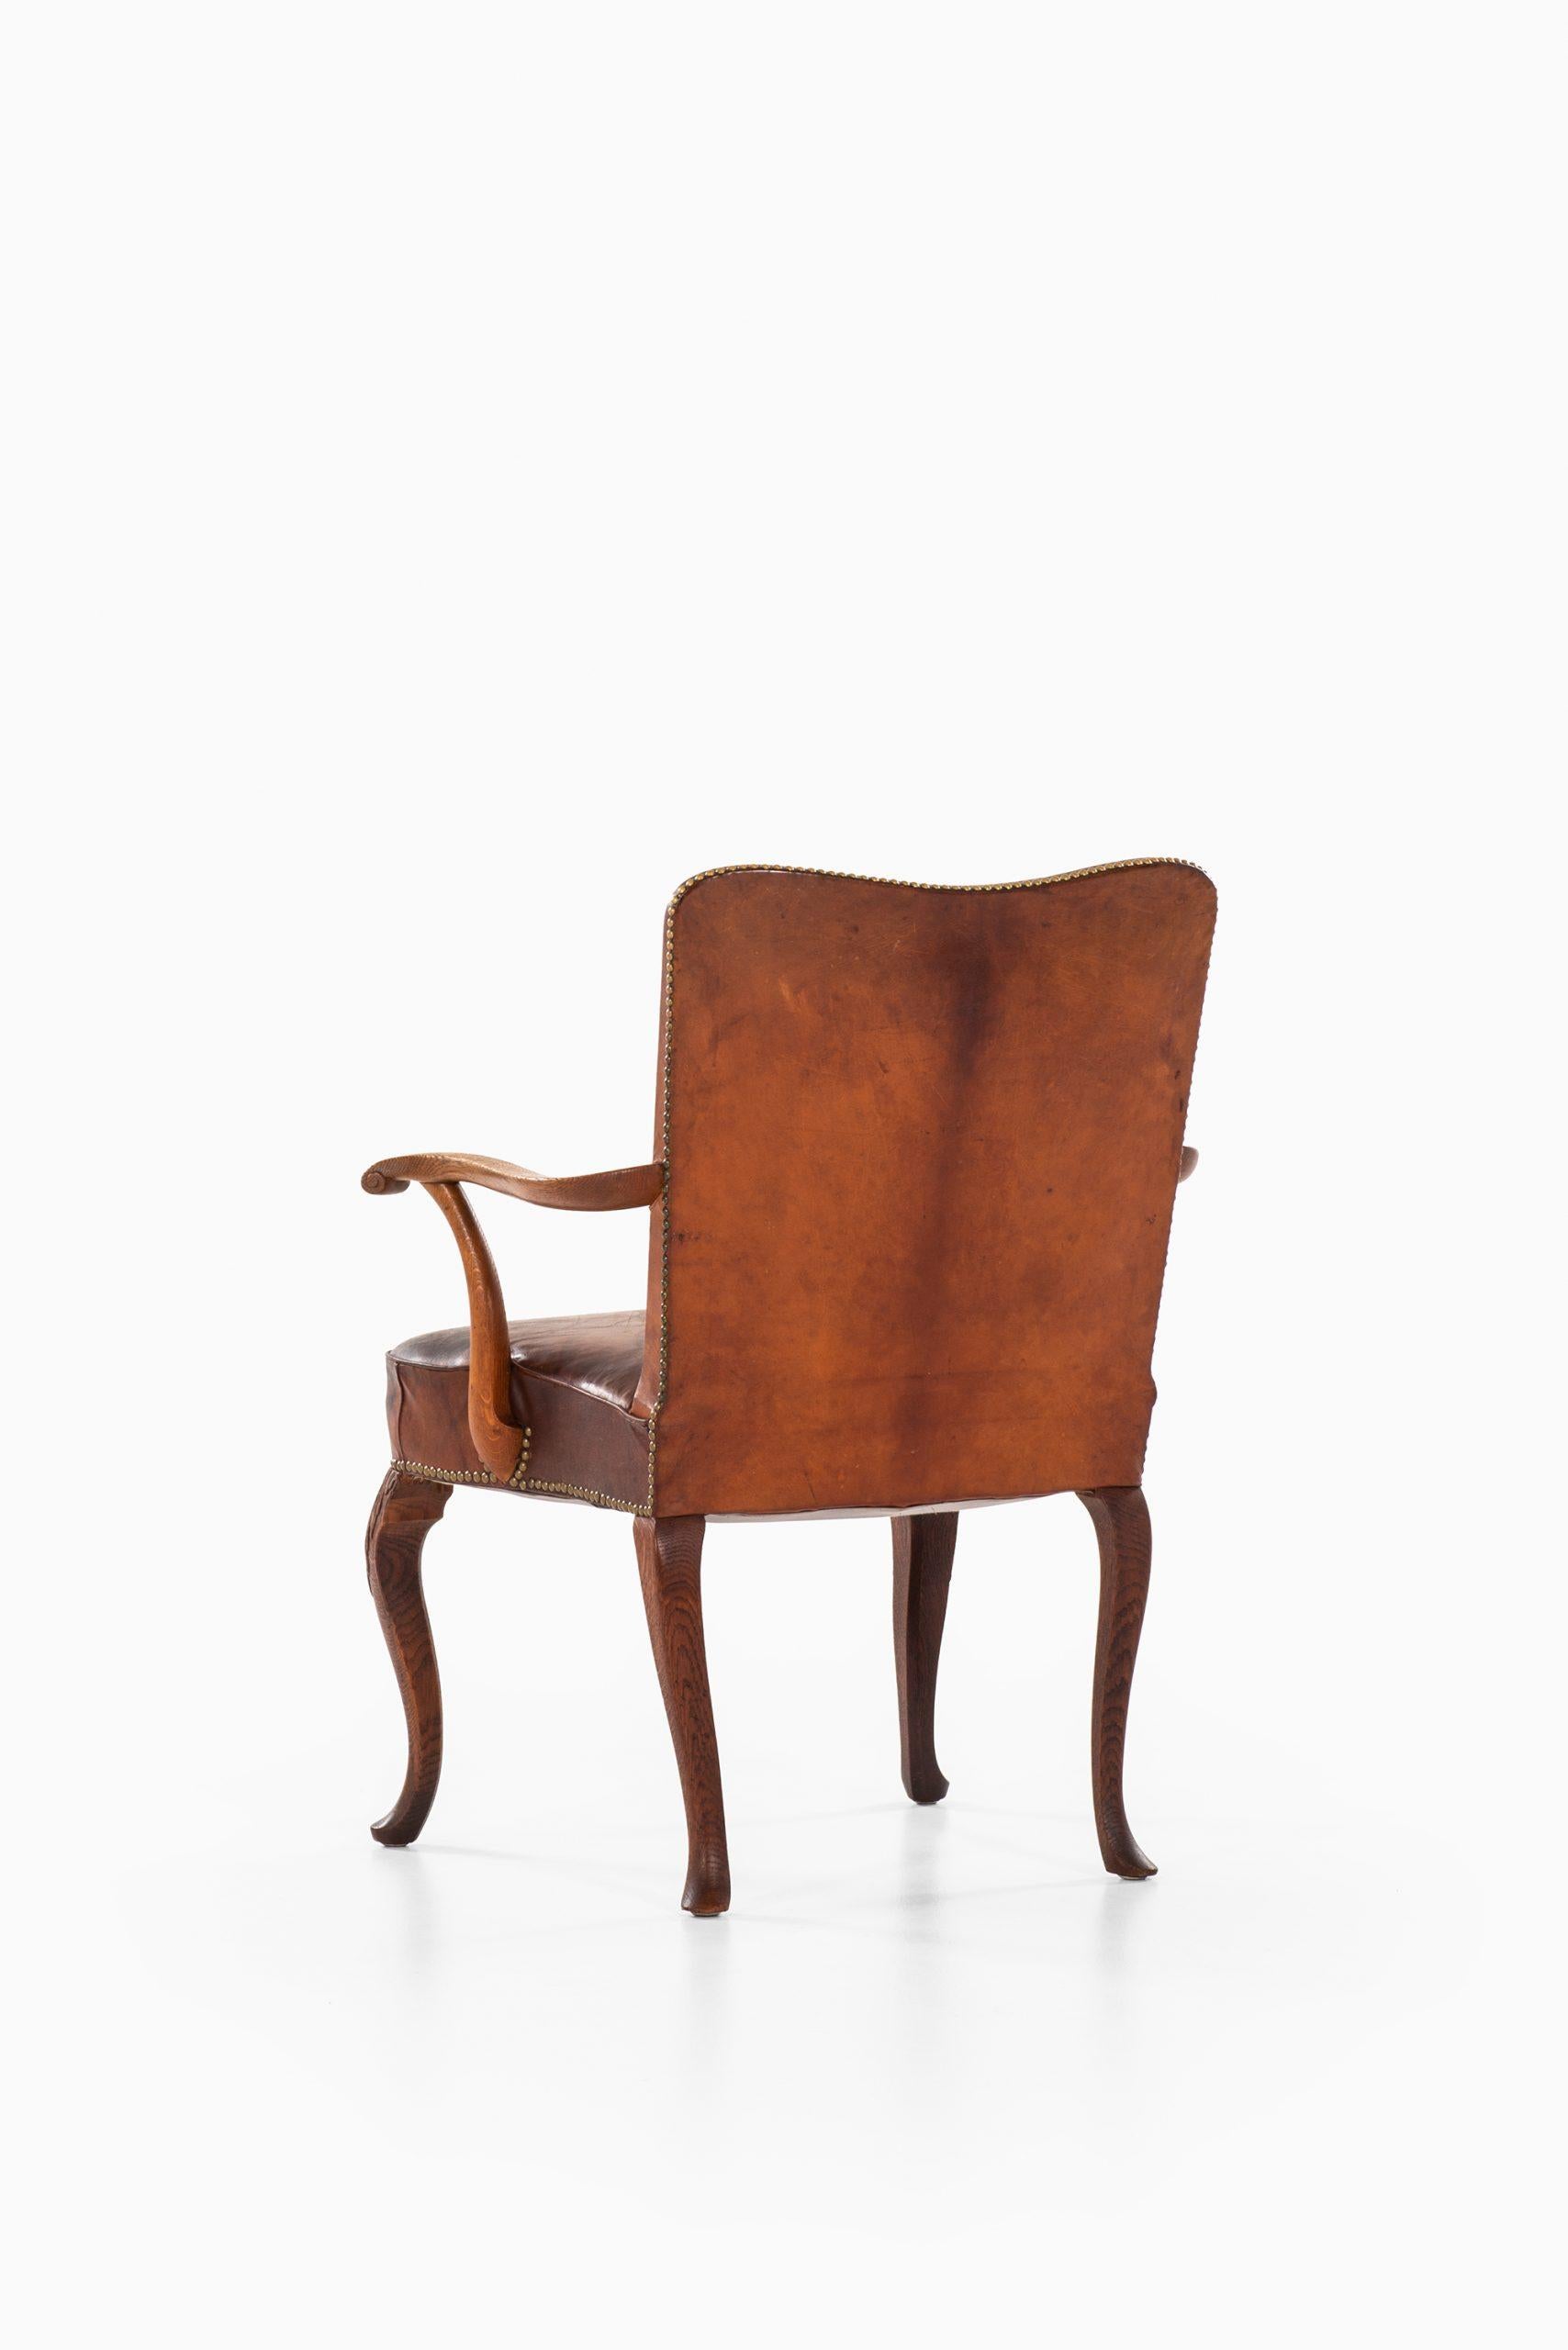 Mid-20th Century Frits Henningsen Armchair Produced by Cabinetmaker Frits Henningsen in Denmark For Sale